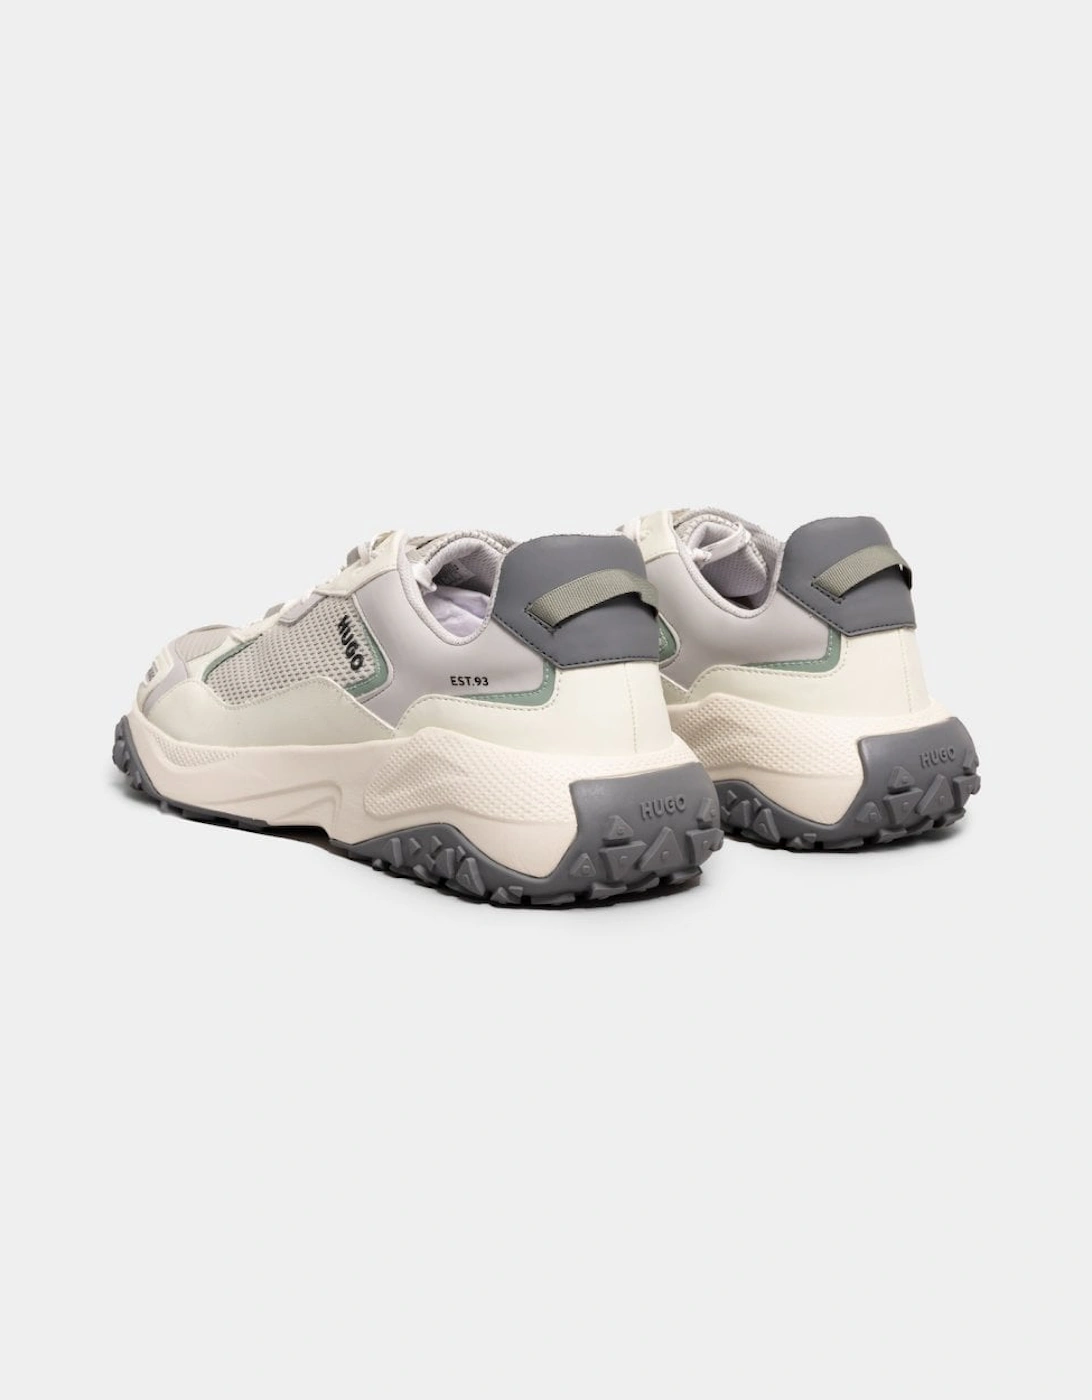 GO1ST Low-Top Trainers With Open-Mesh Uppers, 7 of 6